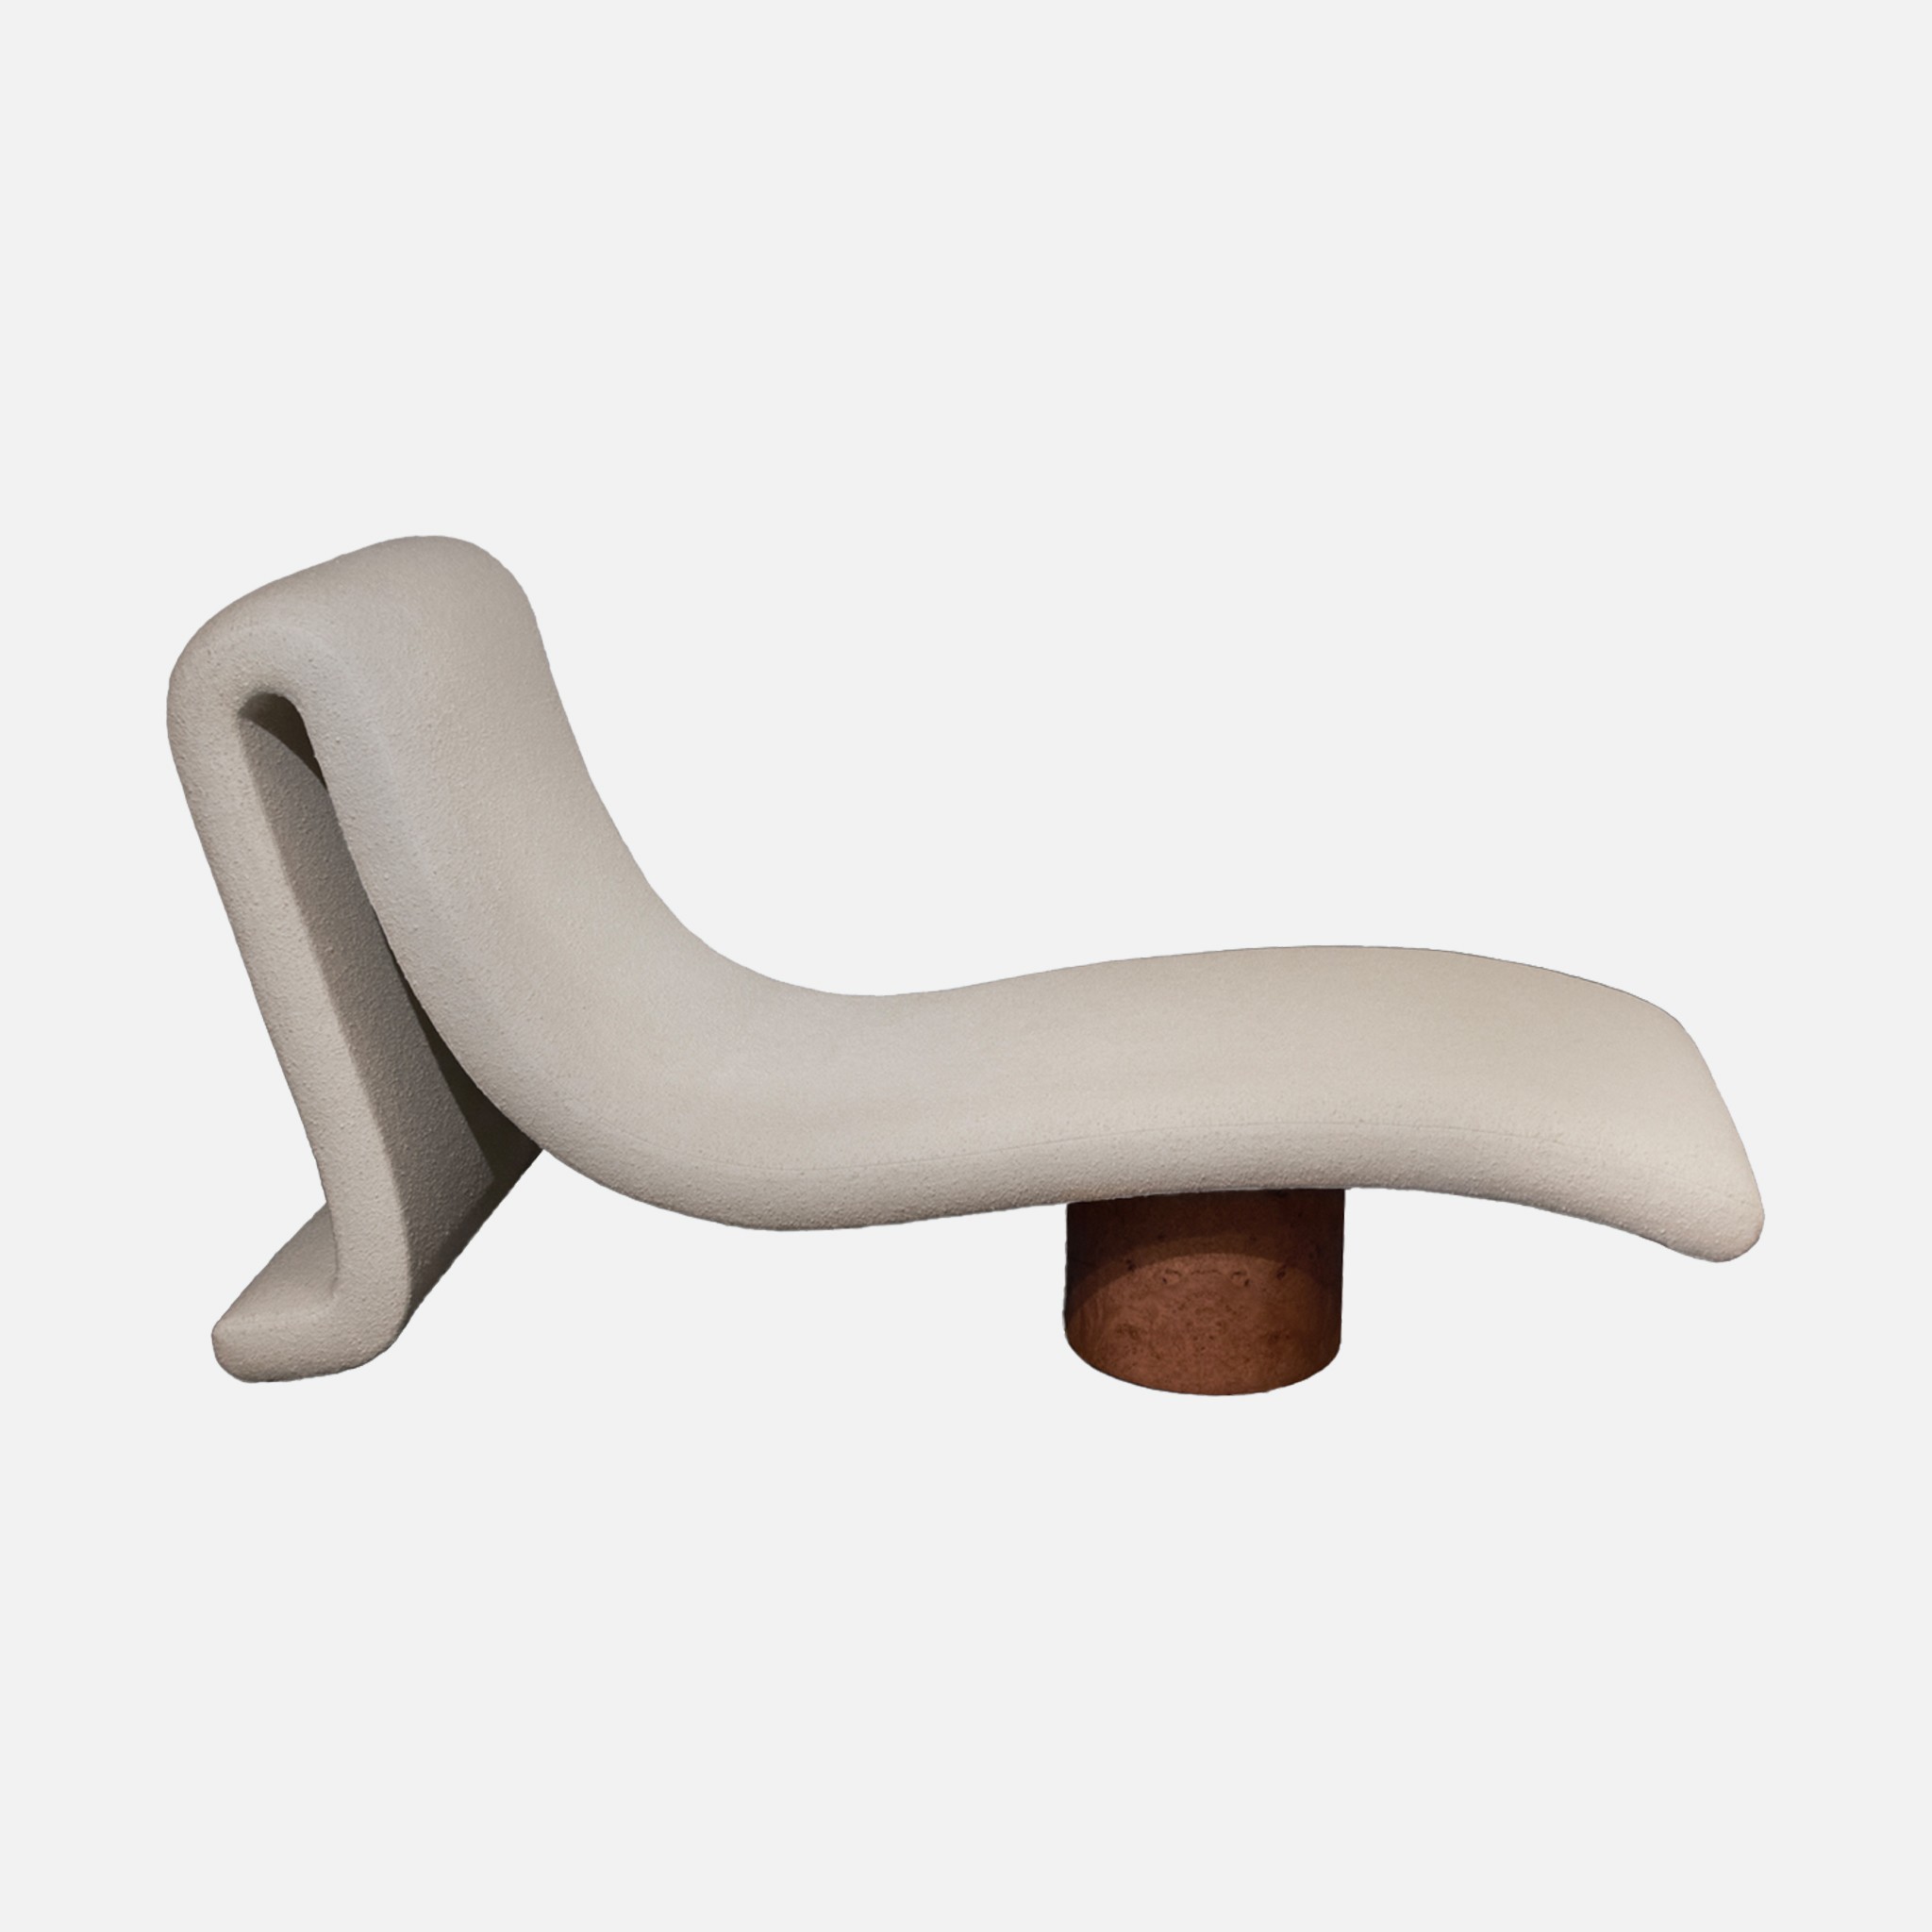 The image of an Slump Chaise product